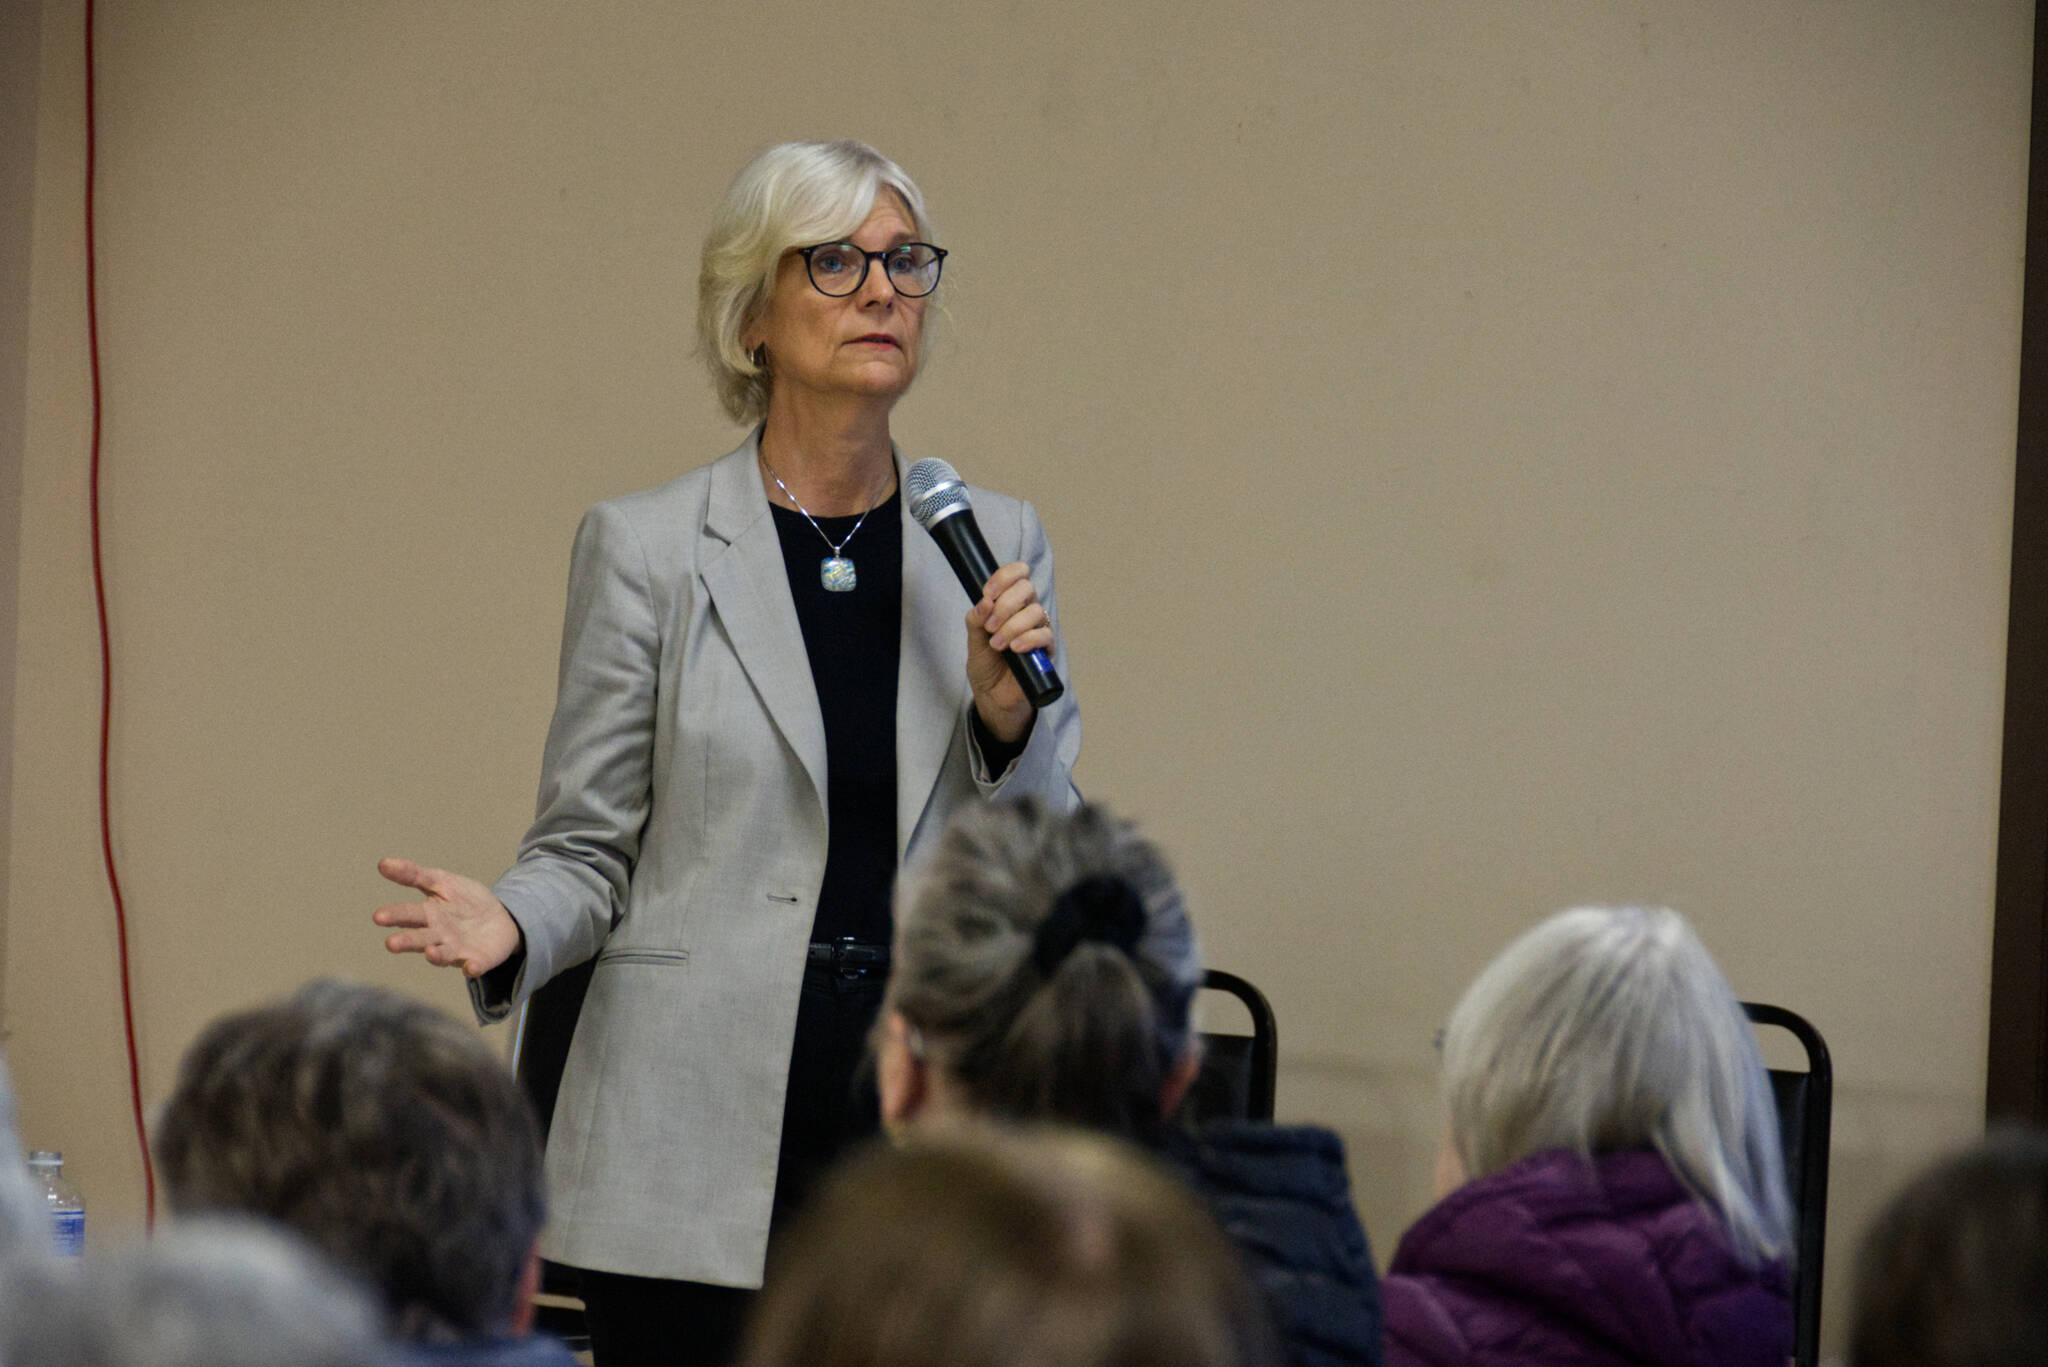 BC Seniors Advocate Isobel Mackenzie presents to senior citizens and local residents during a Town Hall at the Senior Centre in Cranbrook. Trevor Crawley photo.